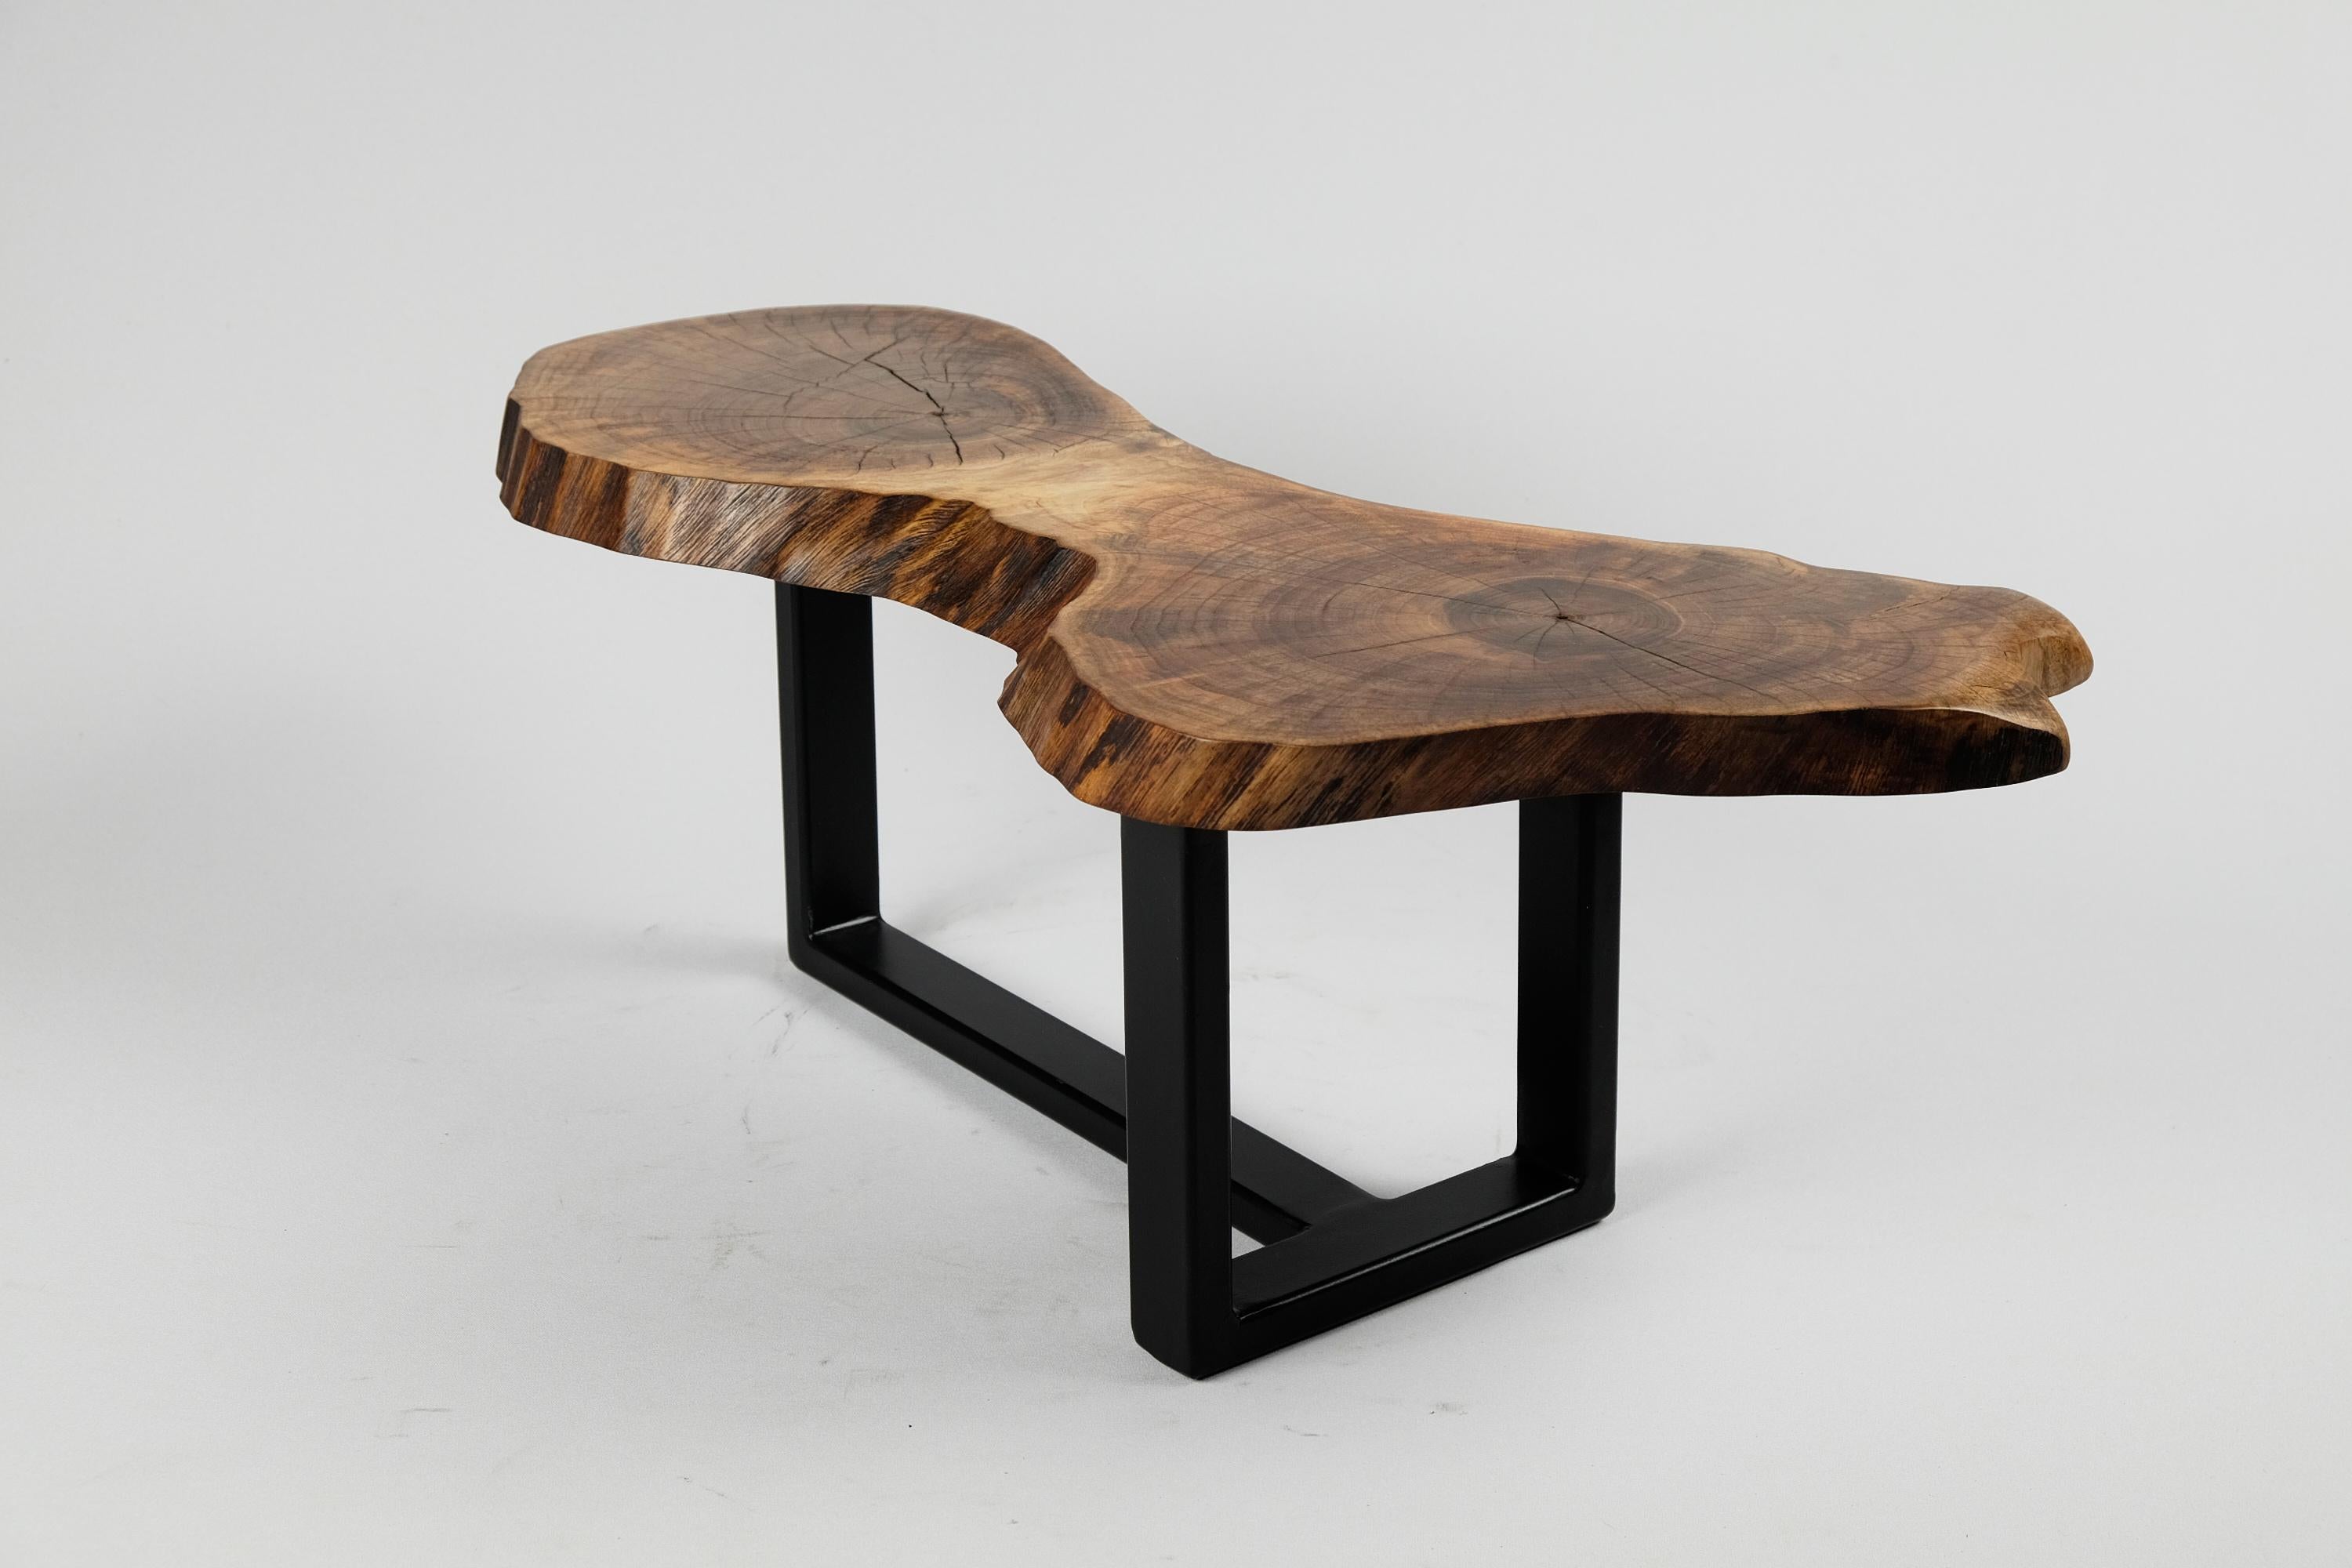 Hand-Crafted Original Contemporary Design, Burnt Oak with Steel, Unique Side Table, Logniture